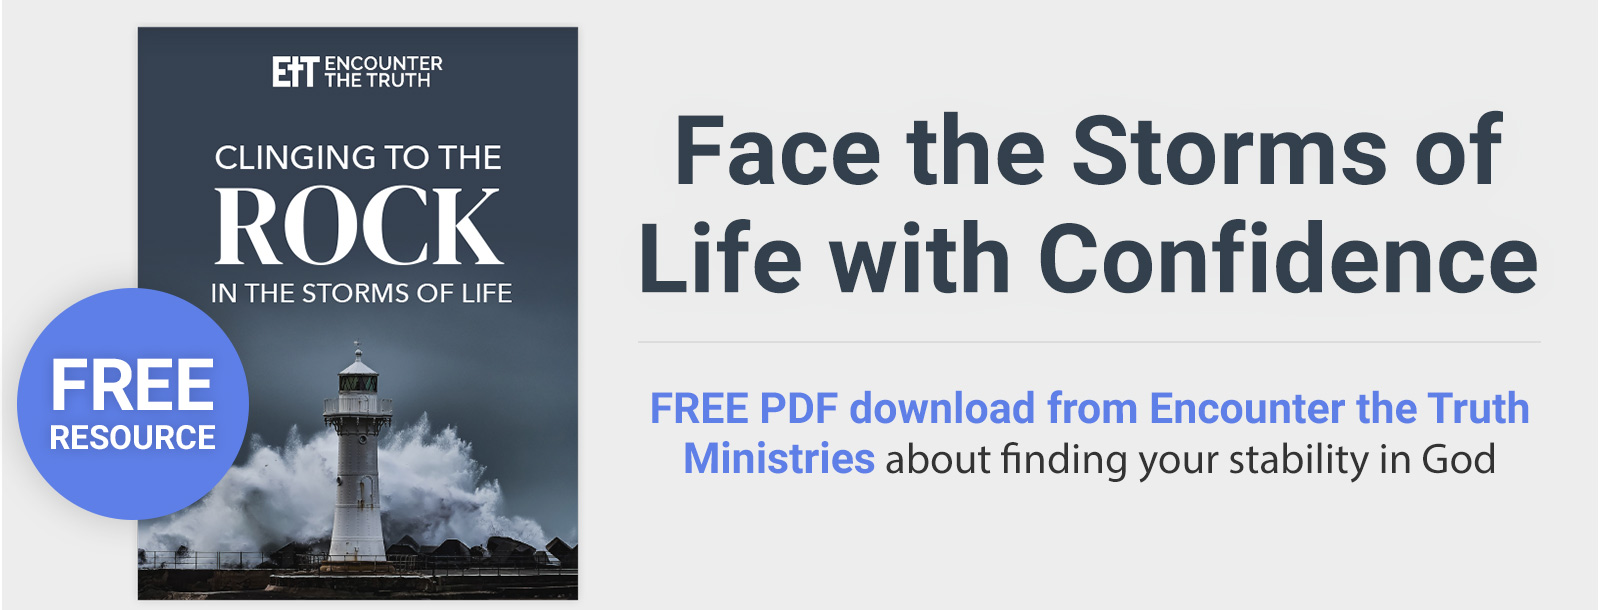 Free Resource - Face the Storms of Life with Confidence - Free PDF download from Encounter the Truth Ministries about finding your stability in God